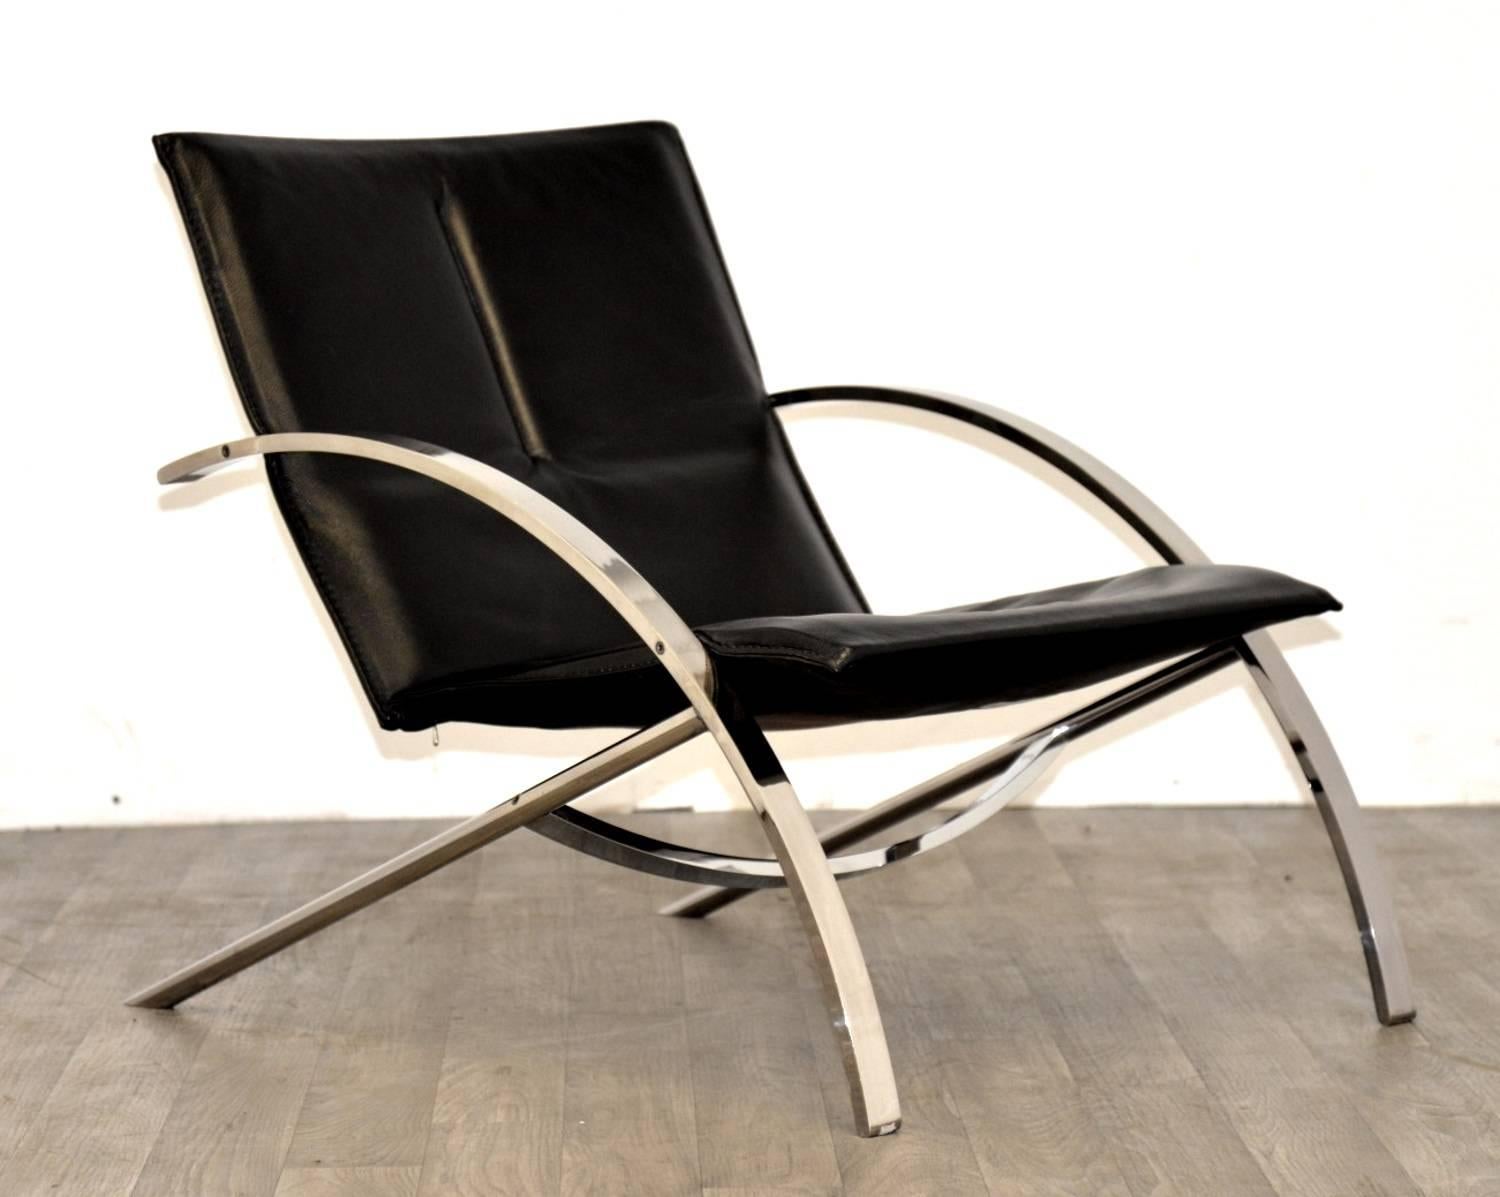 Paul Tuttle Arco Lounge Chairs for Strässle of Switzerland, 1970s For Sale 1